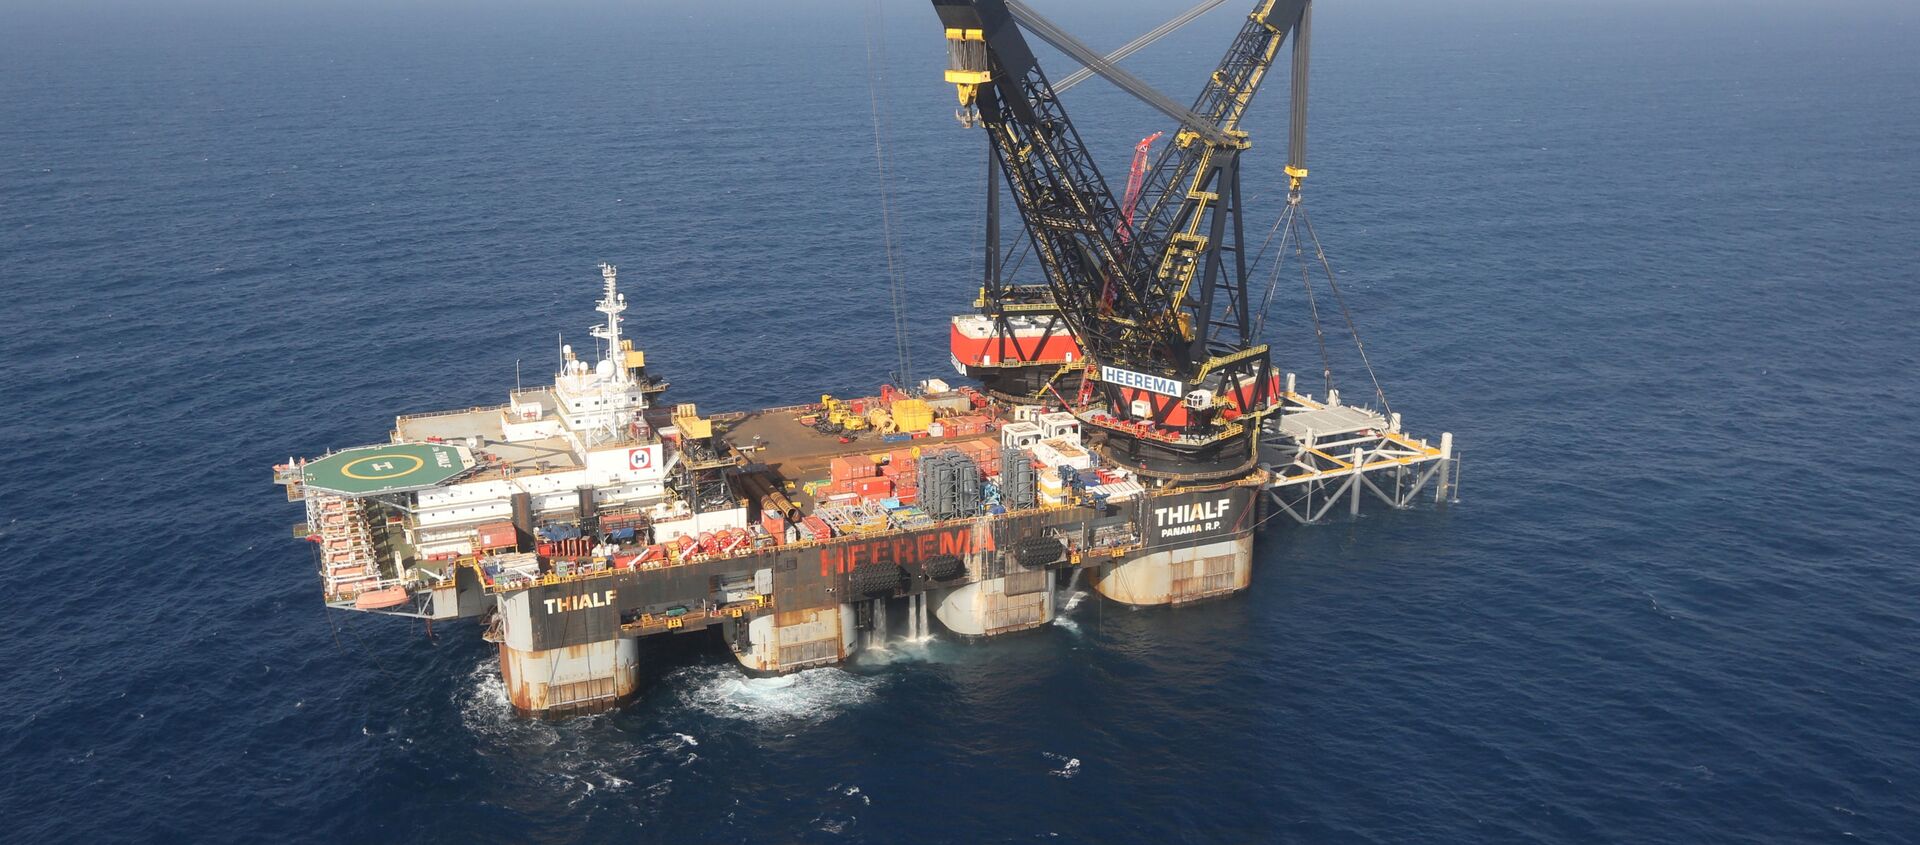 An aerial view shows the foundation platform of Leviathan natural gas field, in the Mediterranean Sea, off the coast of Haifa, Israel on 31 January 2019 - Sputnik International, 1920, 22.07.2020